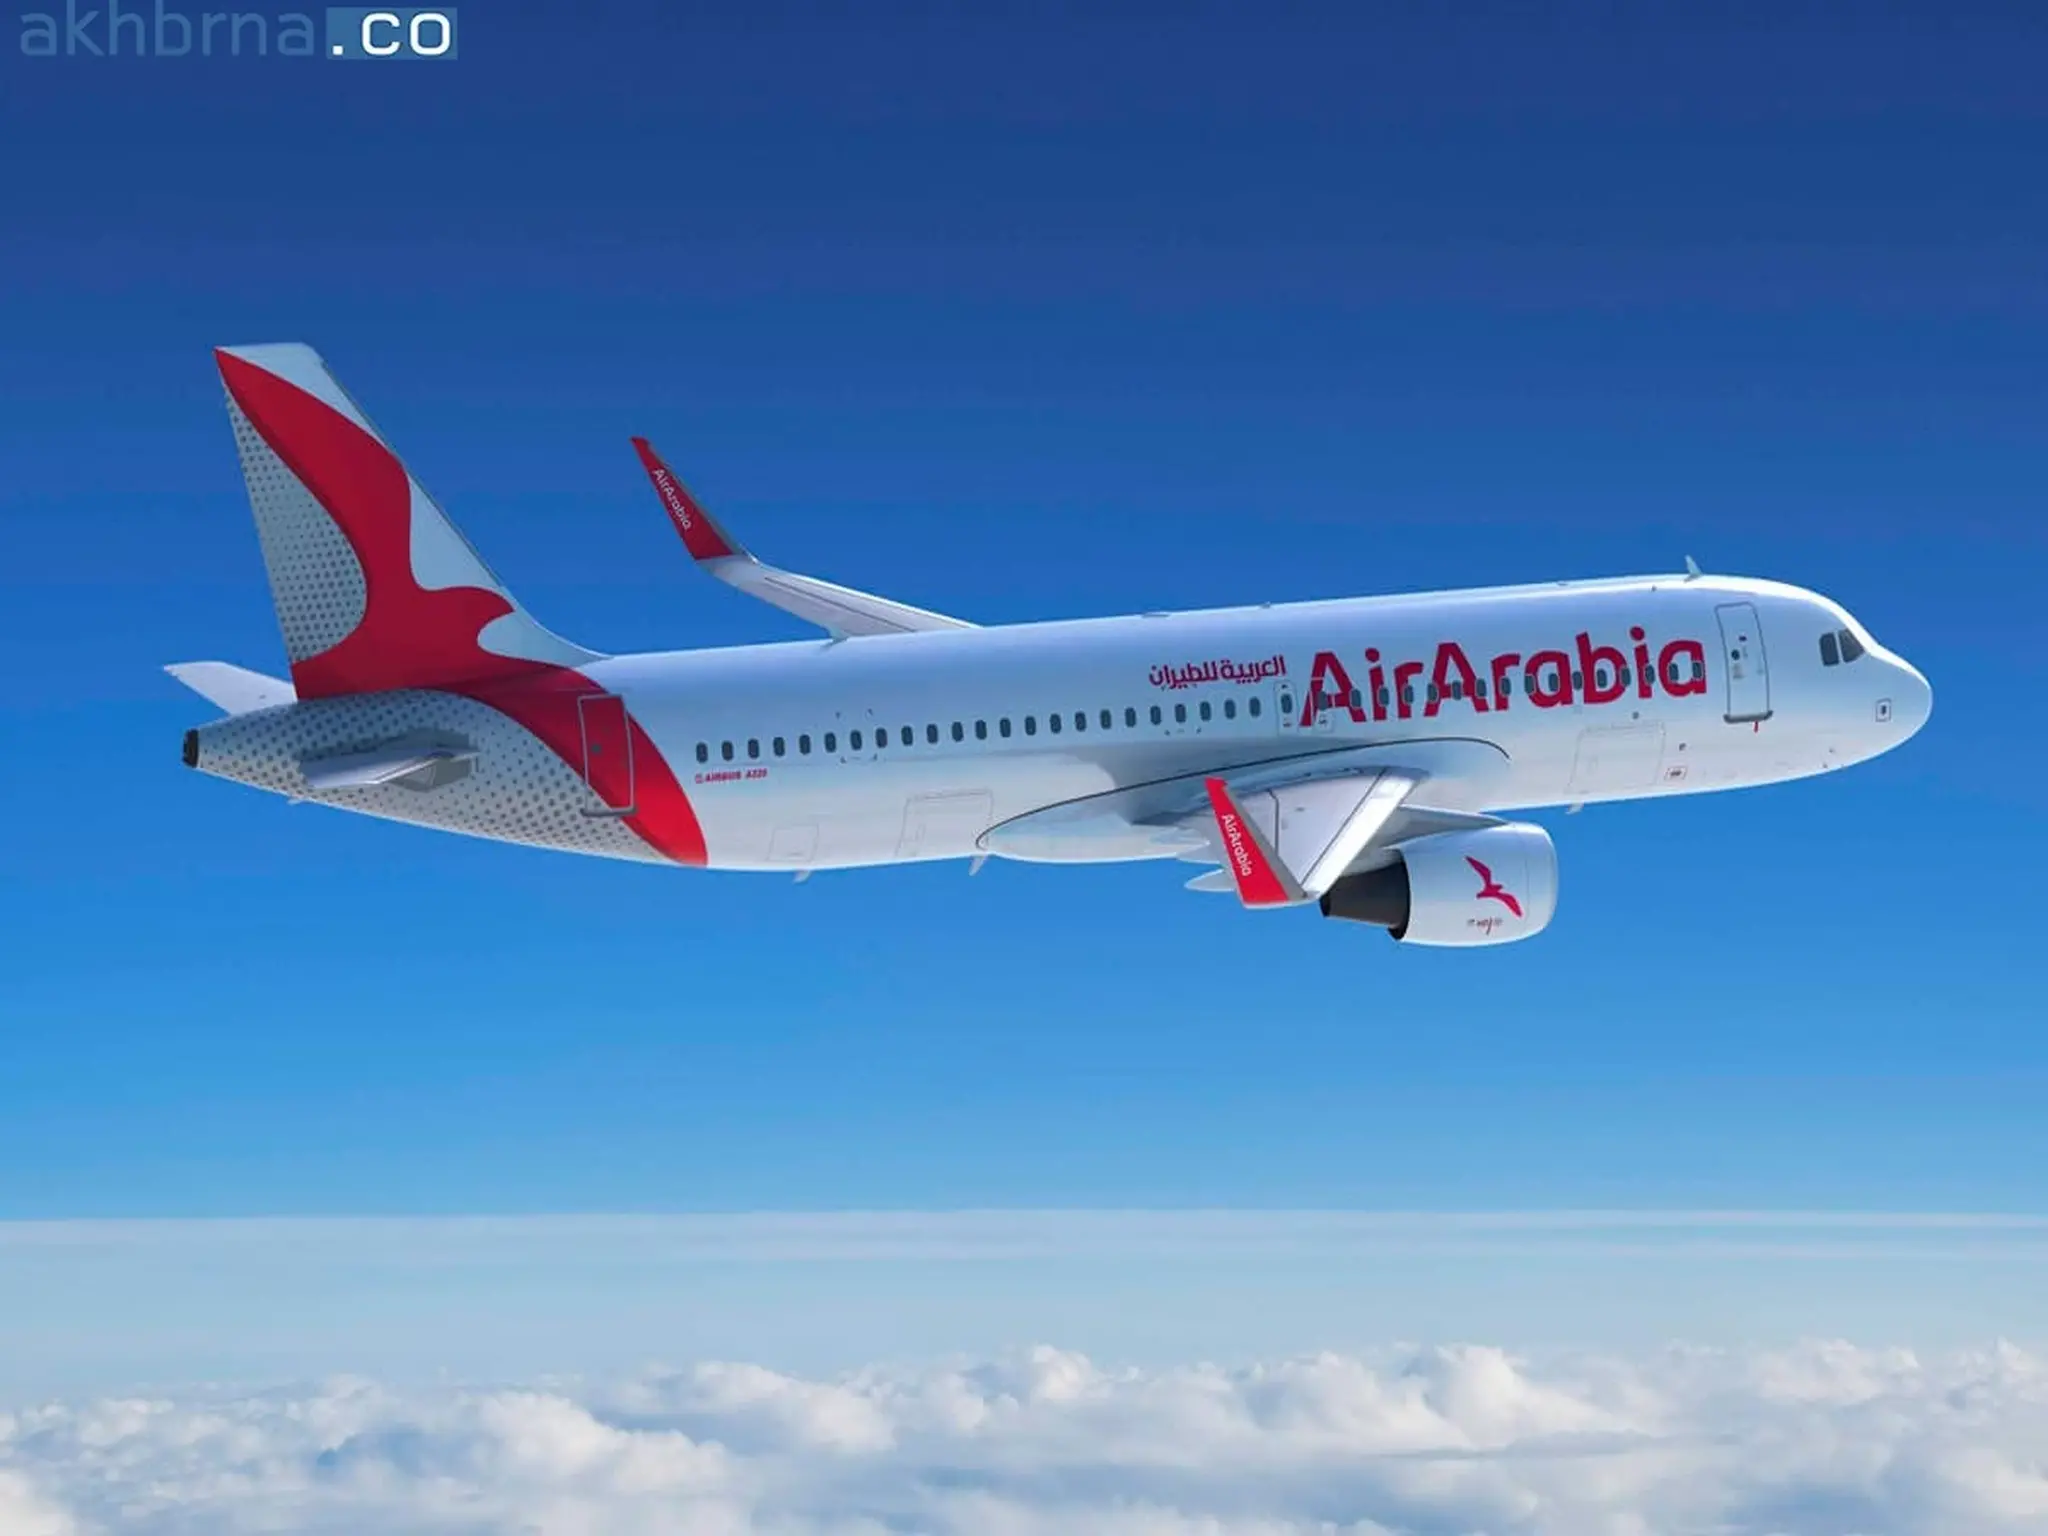 Air Arabia Abu Dhabi announces the launch of its first flight to Colombo